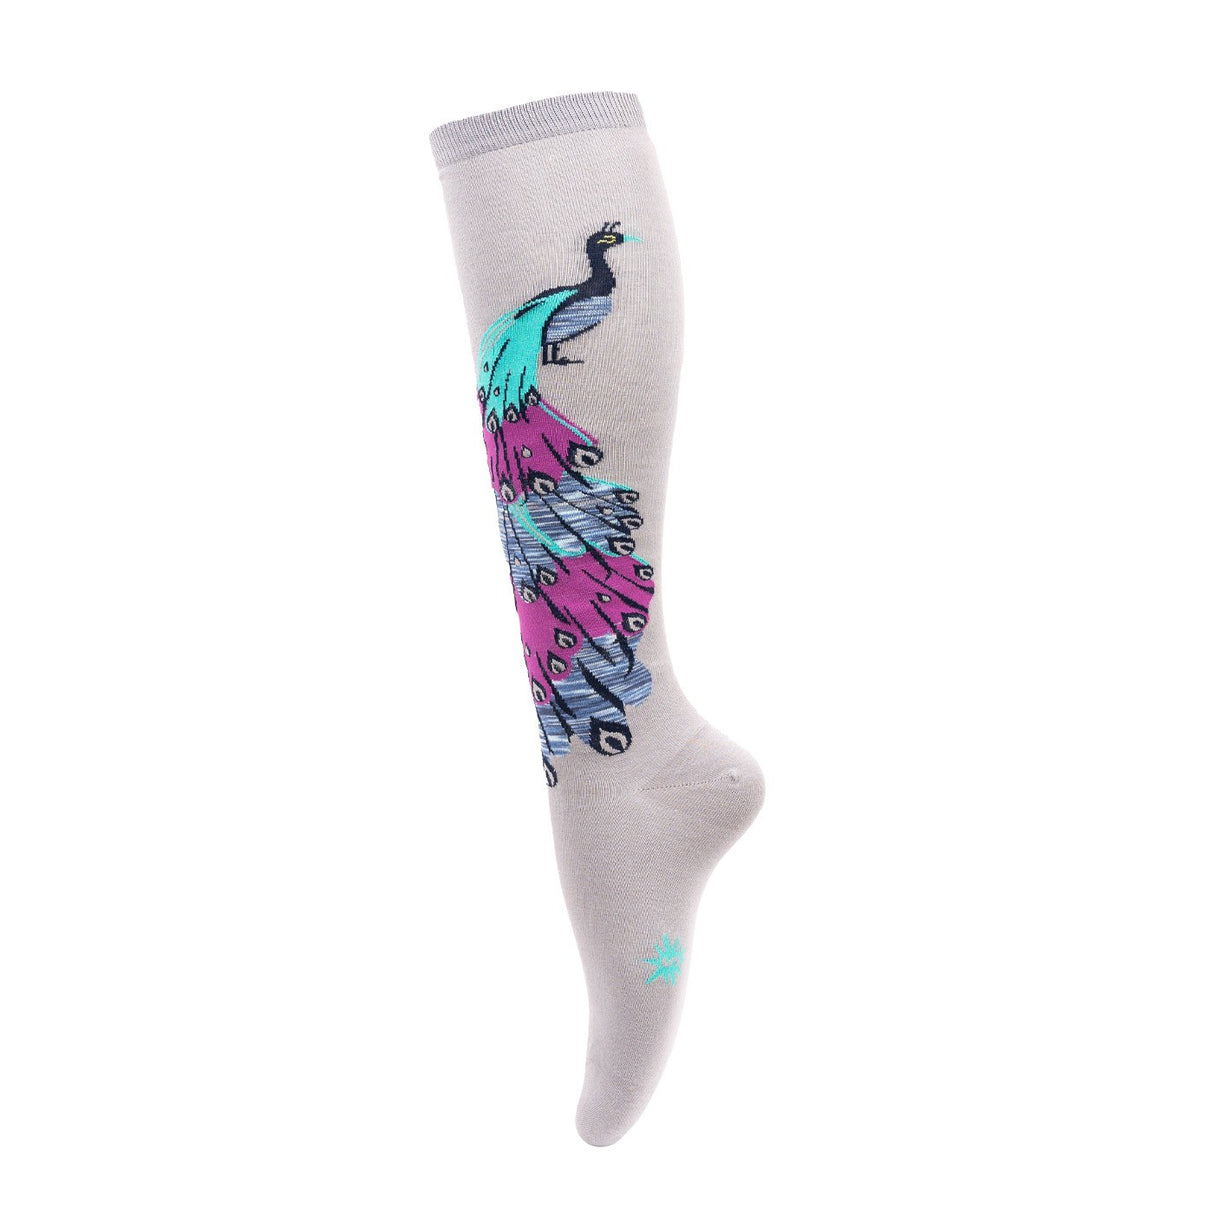 Sock It To Me Socks  Funny Socks With Cats, Unicorns & More